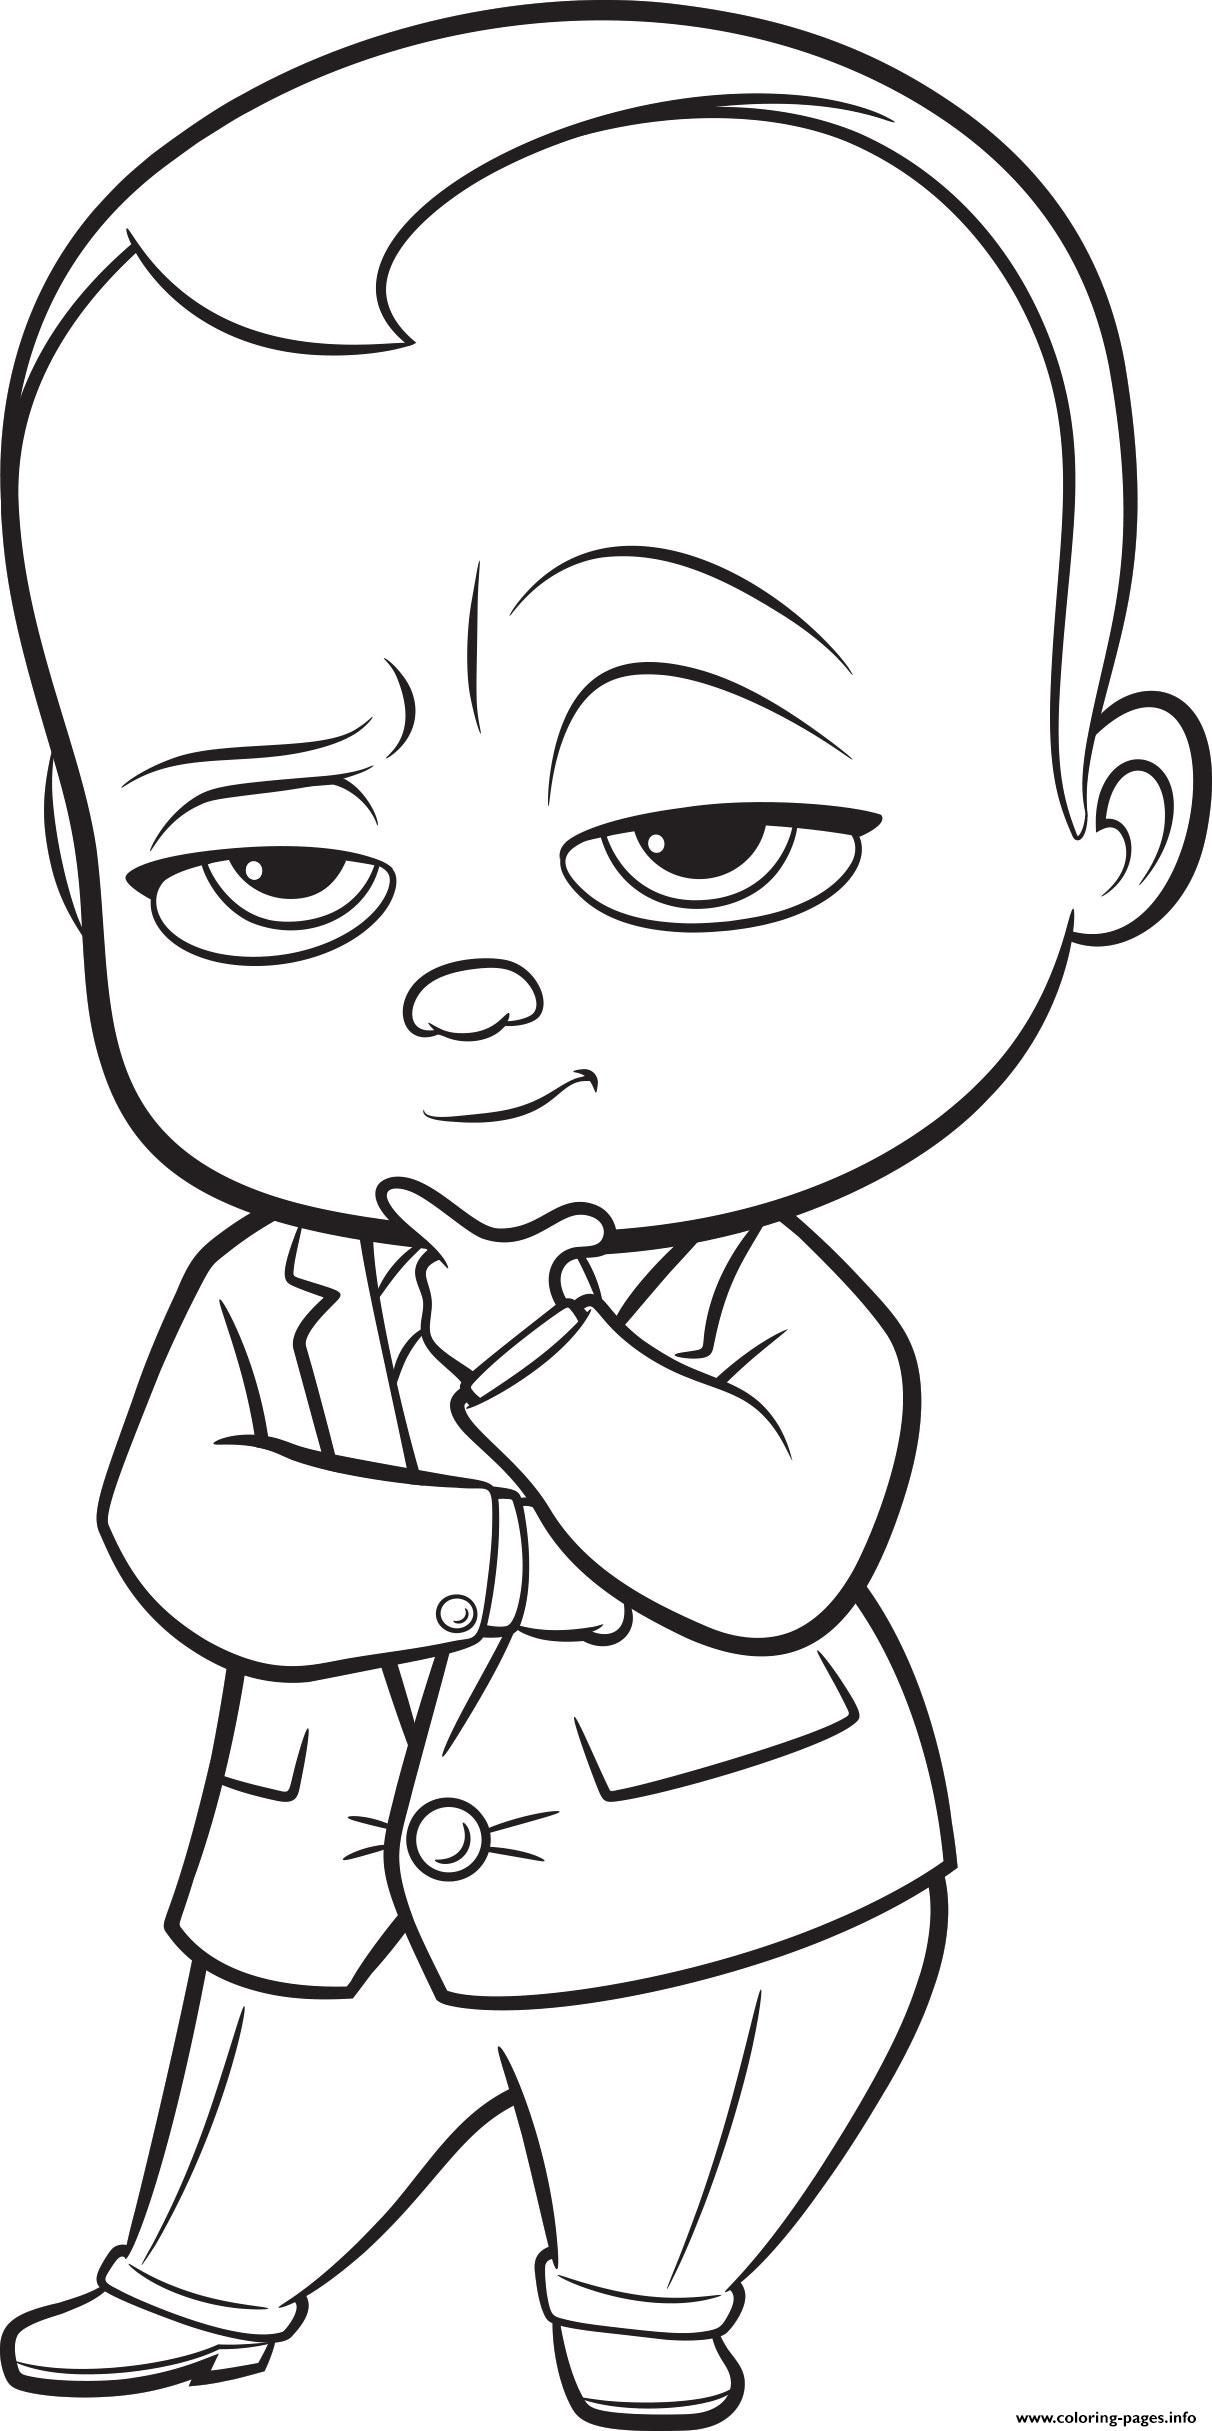 Free Coloring Pages For Kids To Print
 Print The Boss Baby colouring coloring pages in 2019